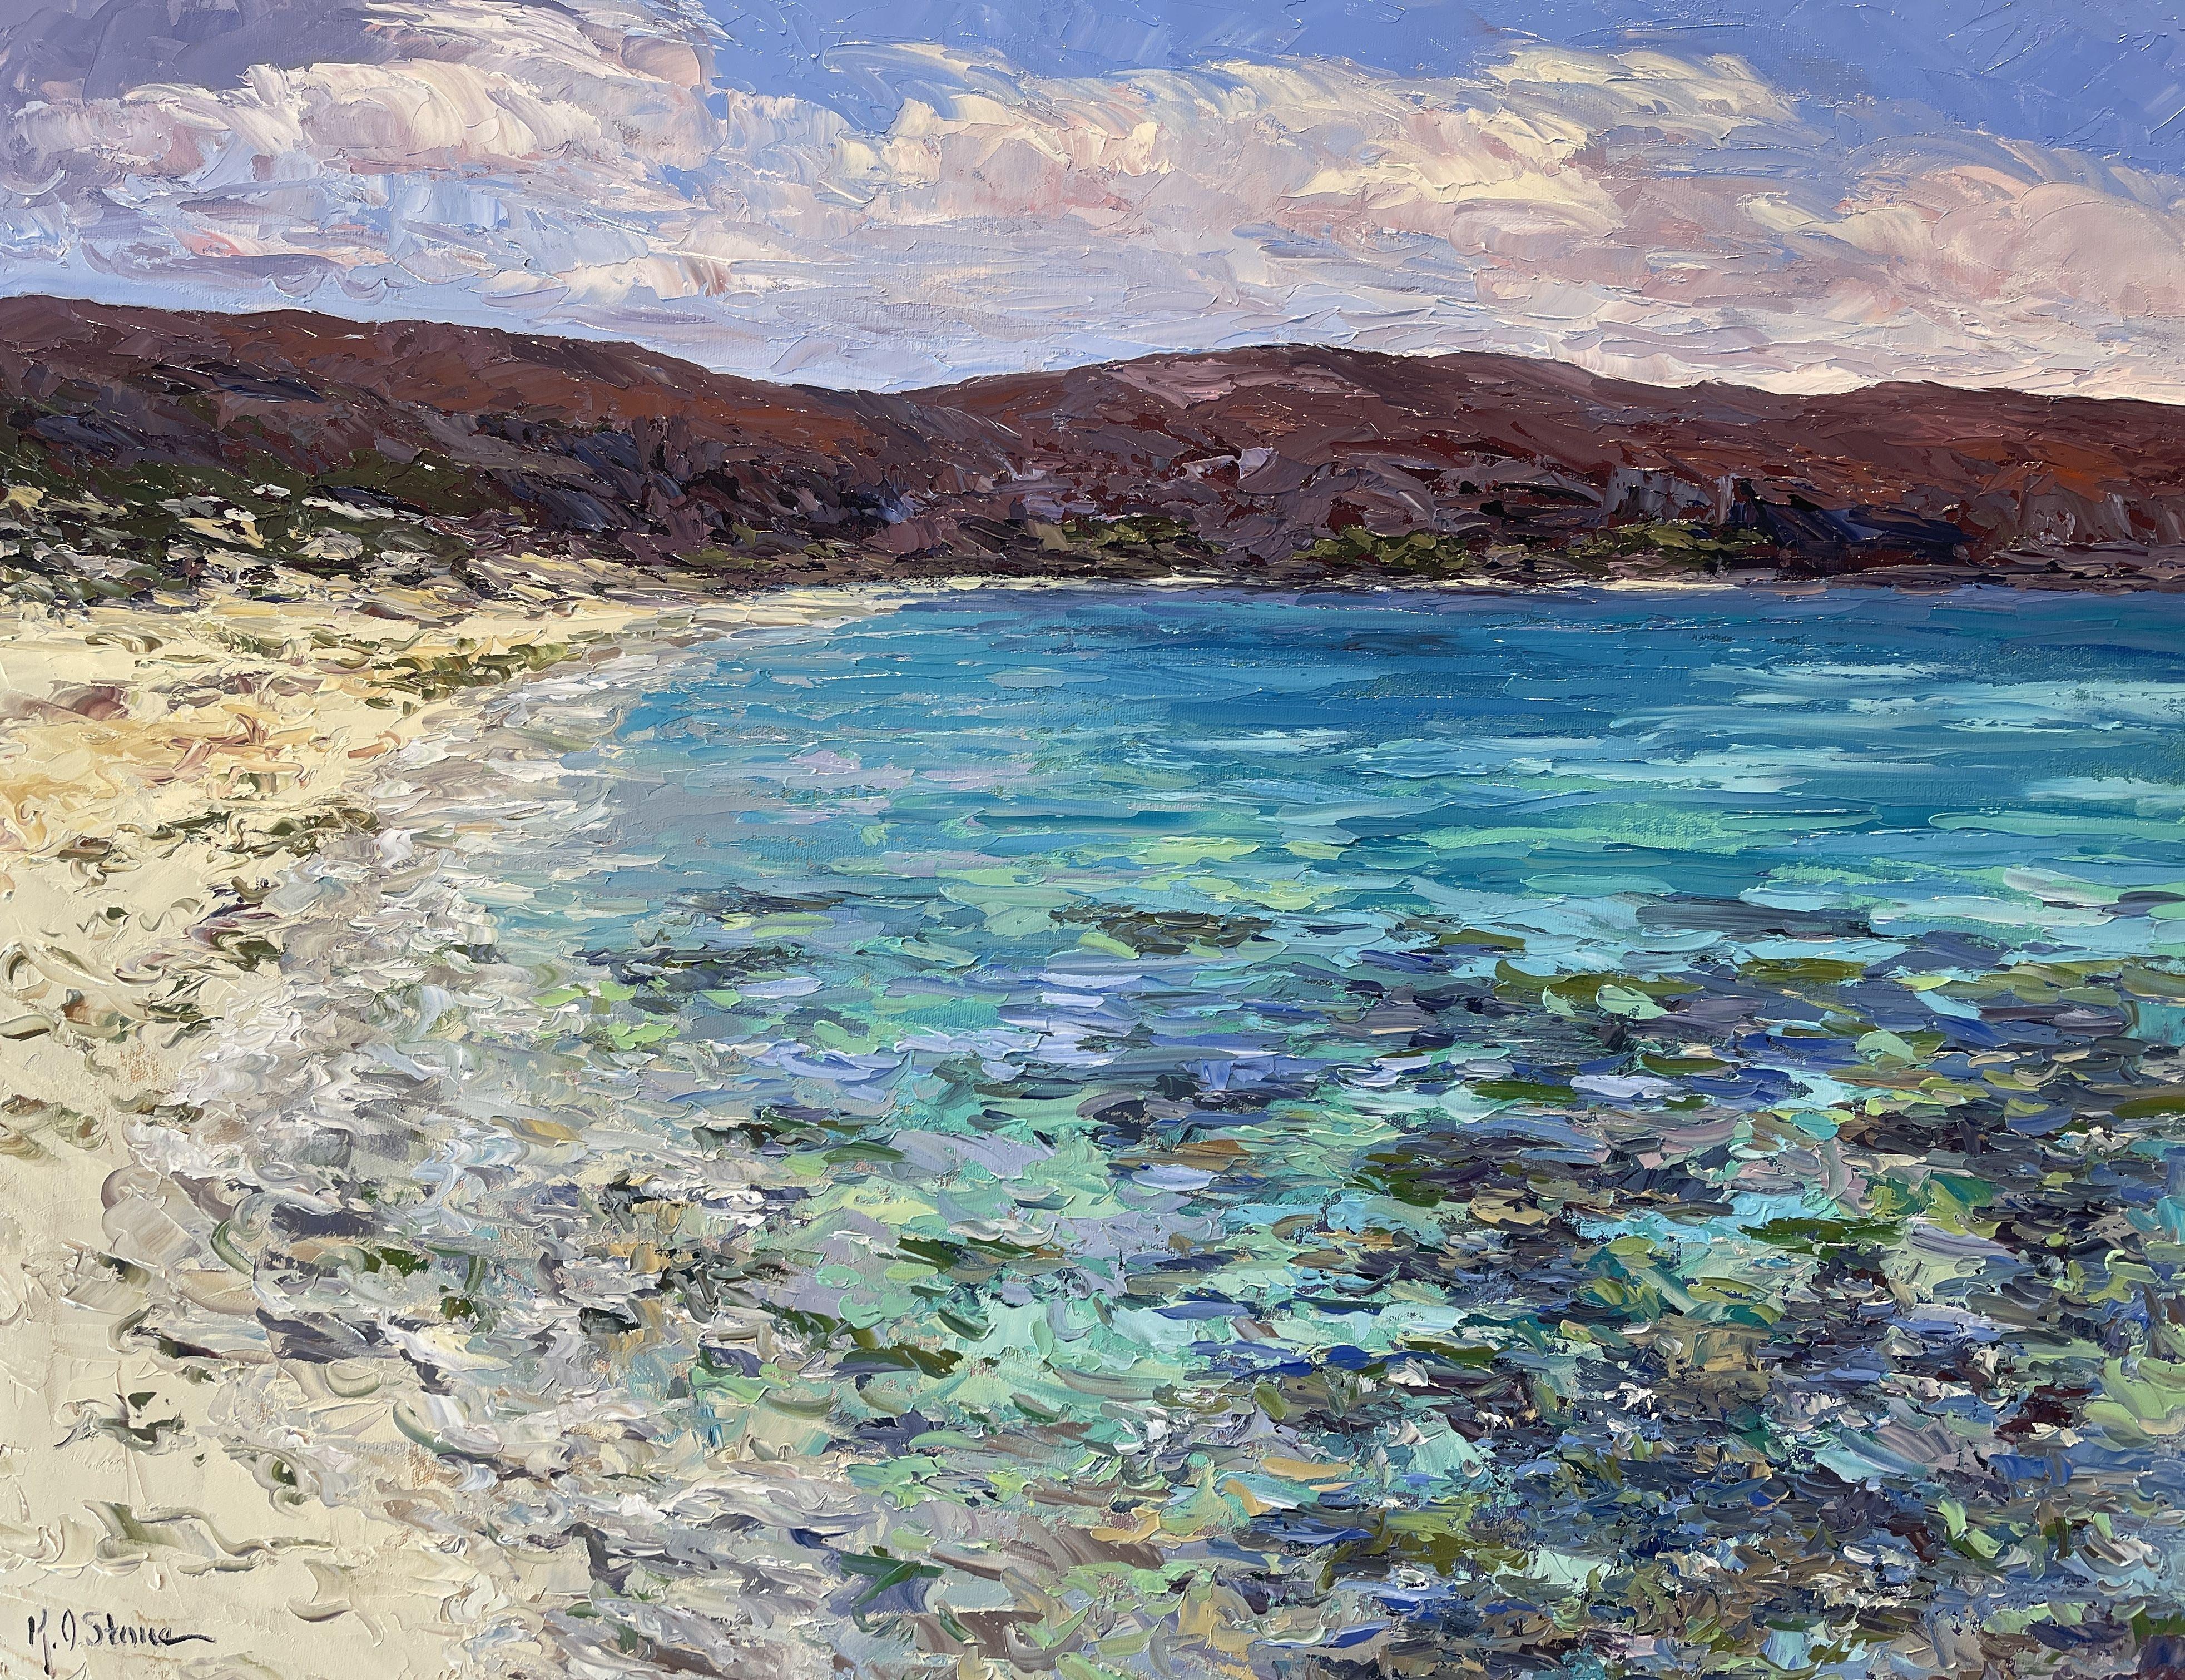 An original textured seascape oil painting of Balandra Bay, Mexico. This is one of the most beautiful bays in the world, the colors of the reef and blue water are absolutely stunning. I added layers upon layers of paint to capture the movement of